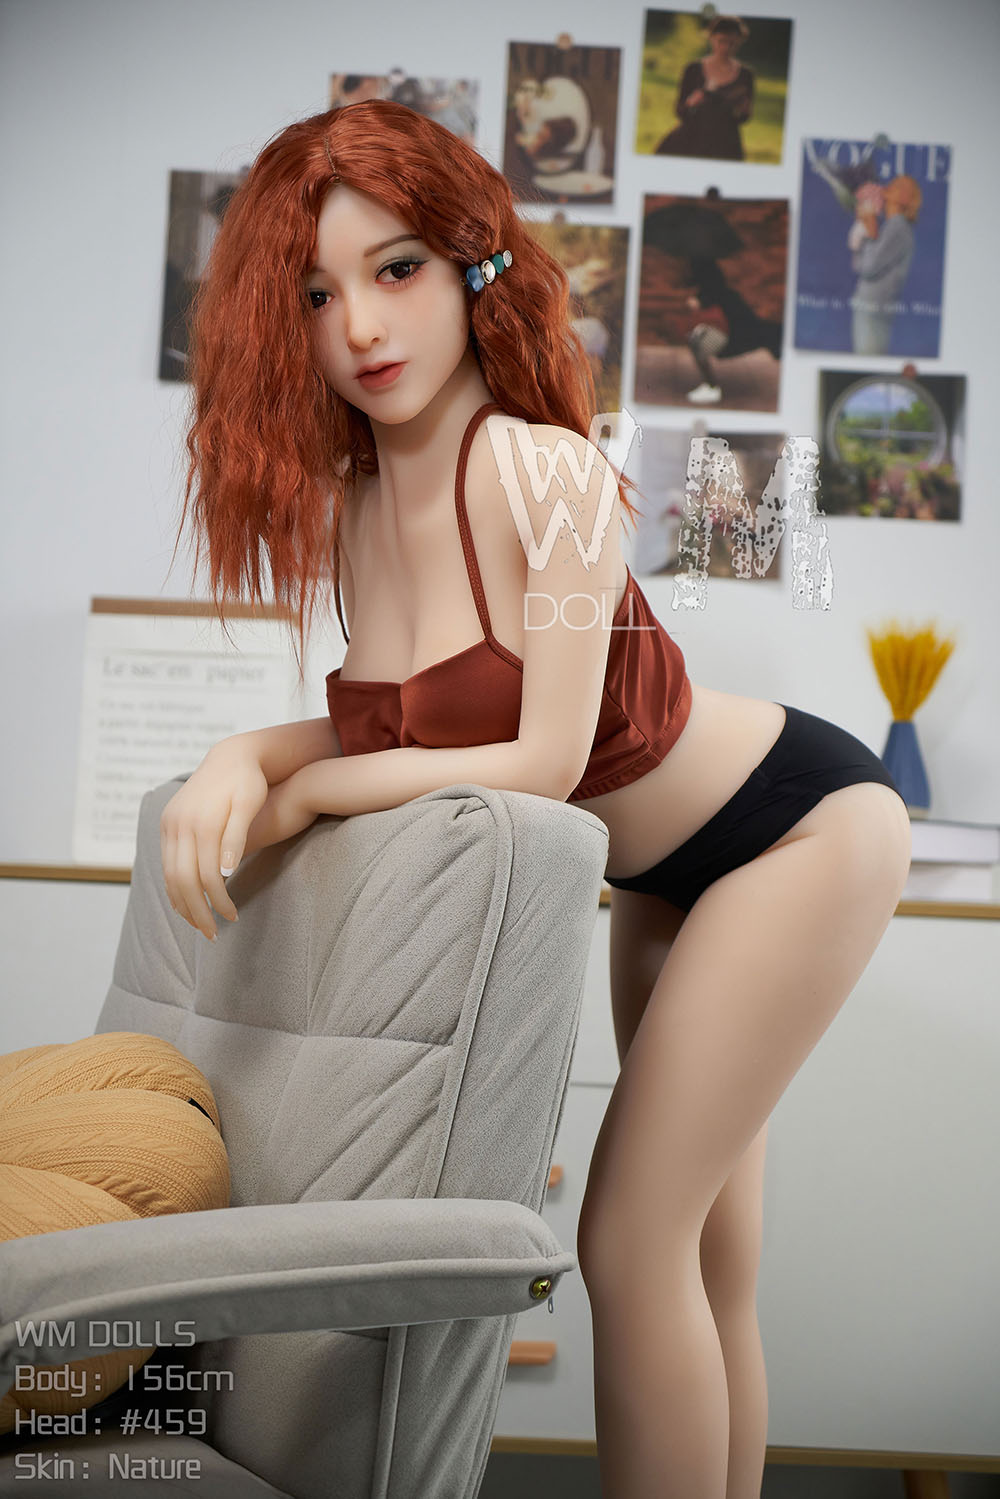  red hair young sex doll with underwears